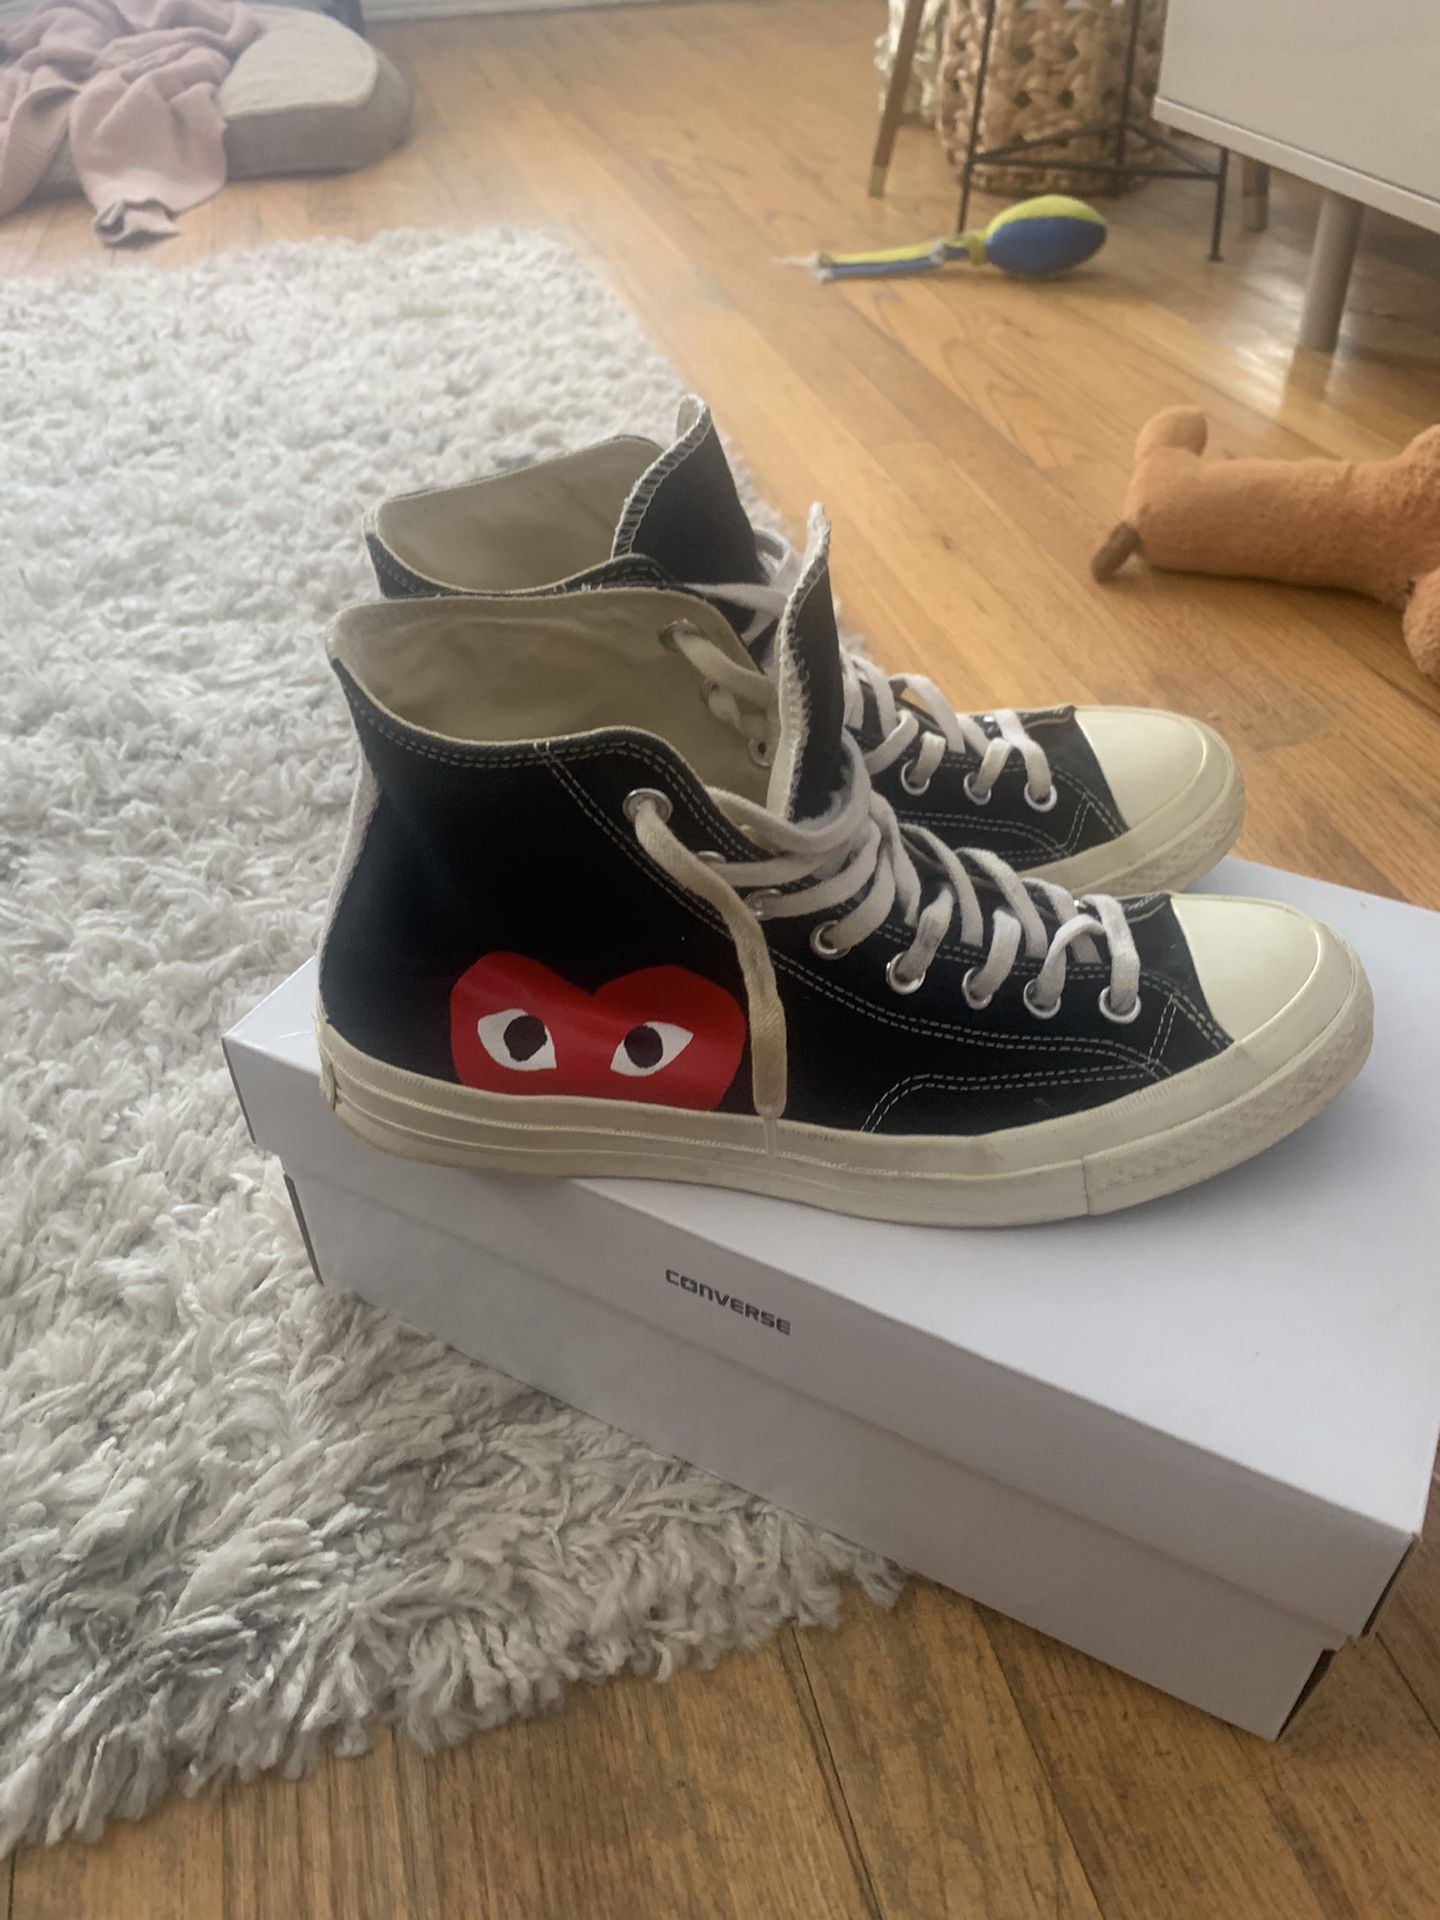 Converse CDG size 10